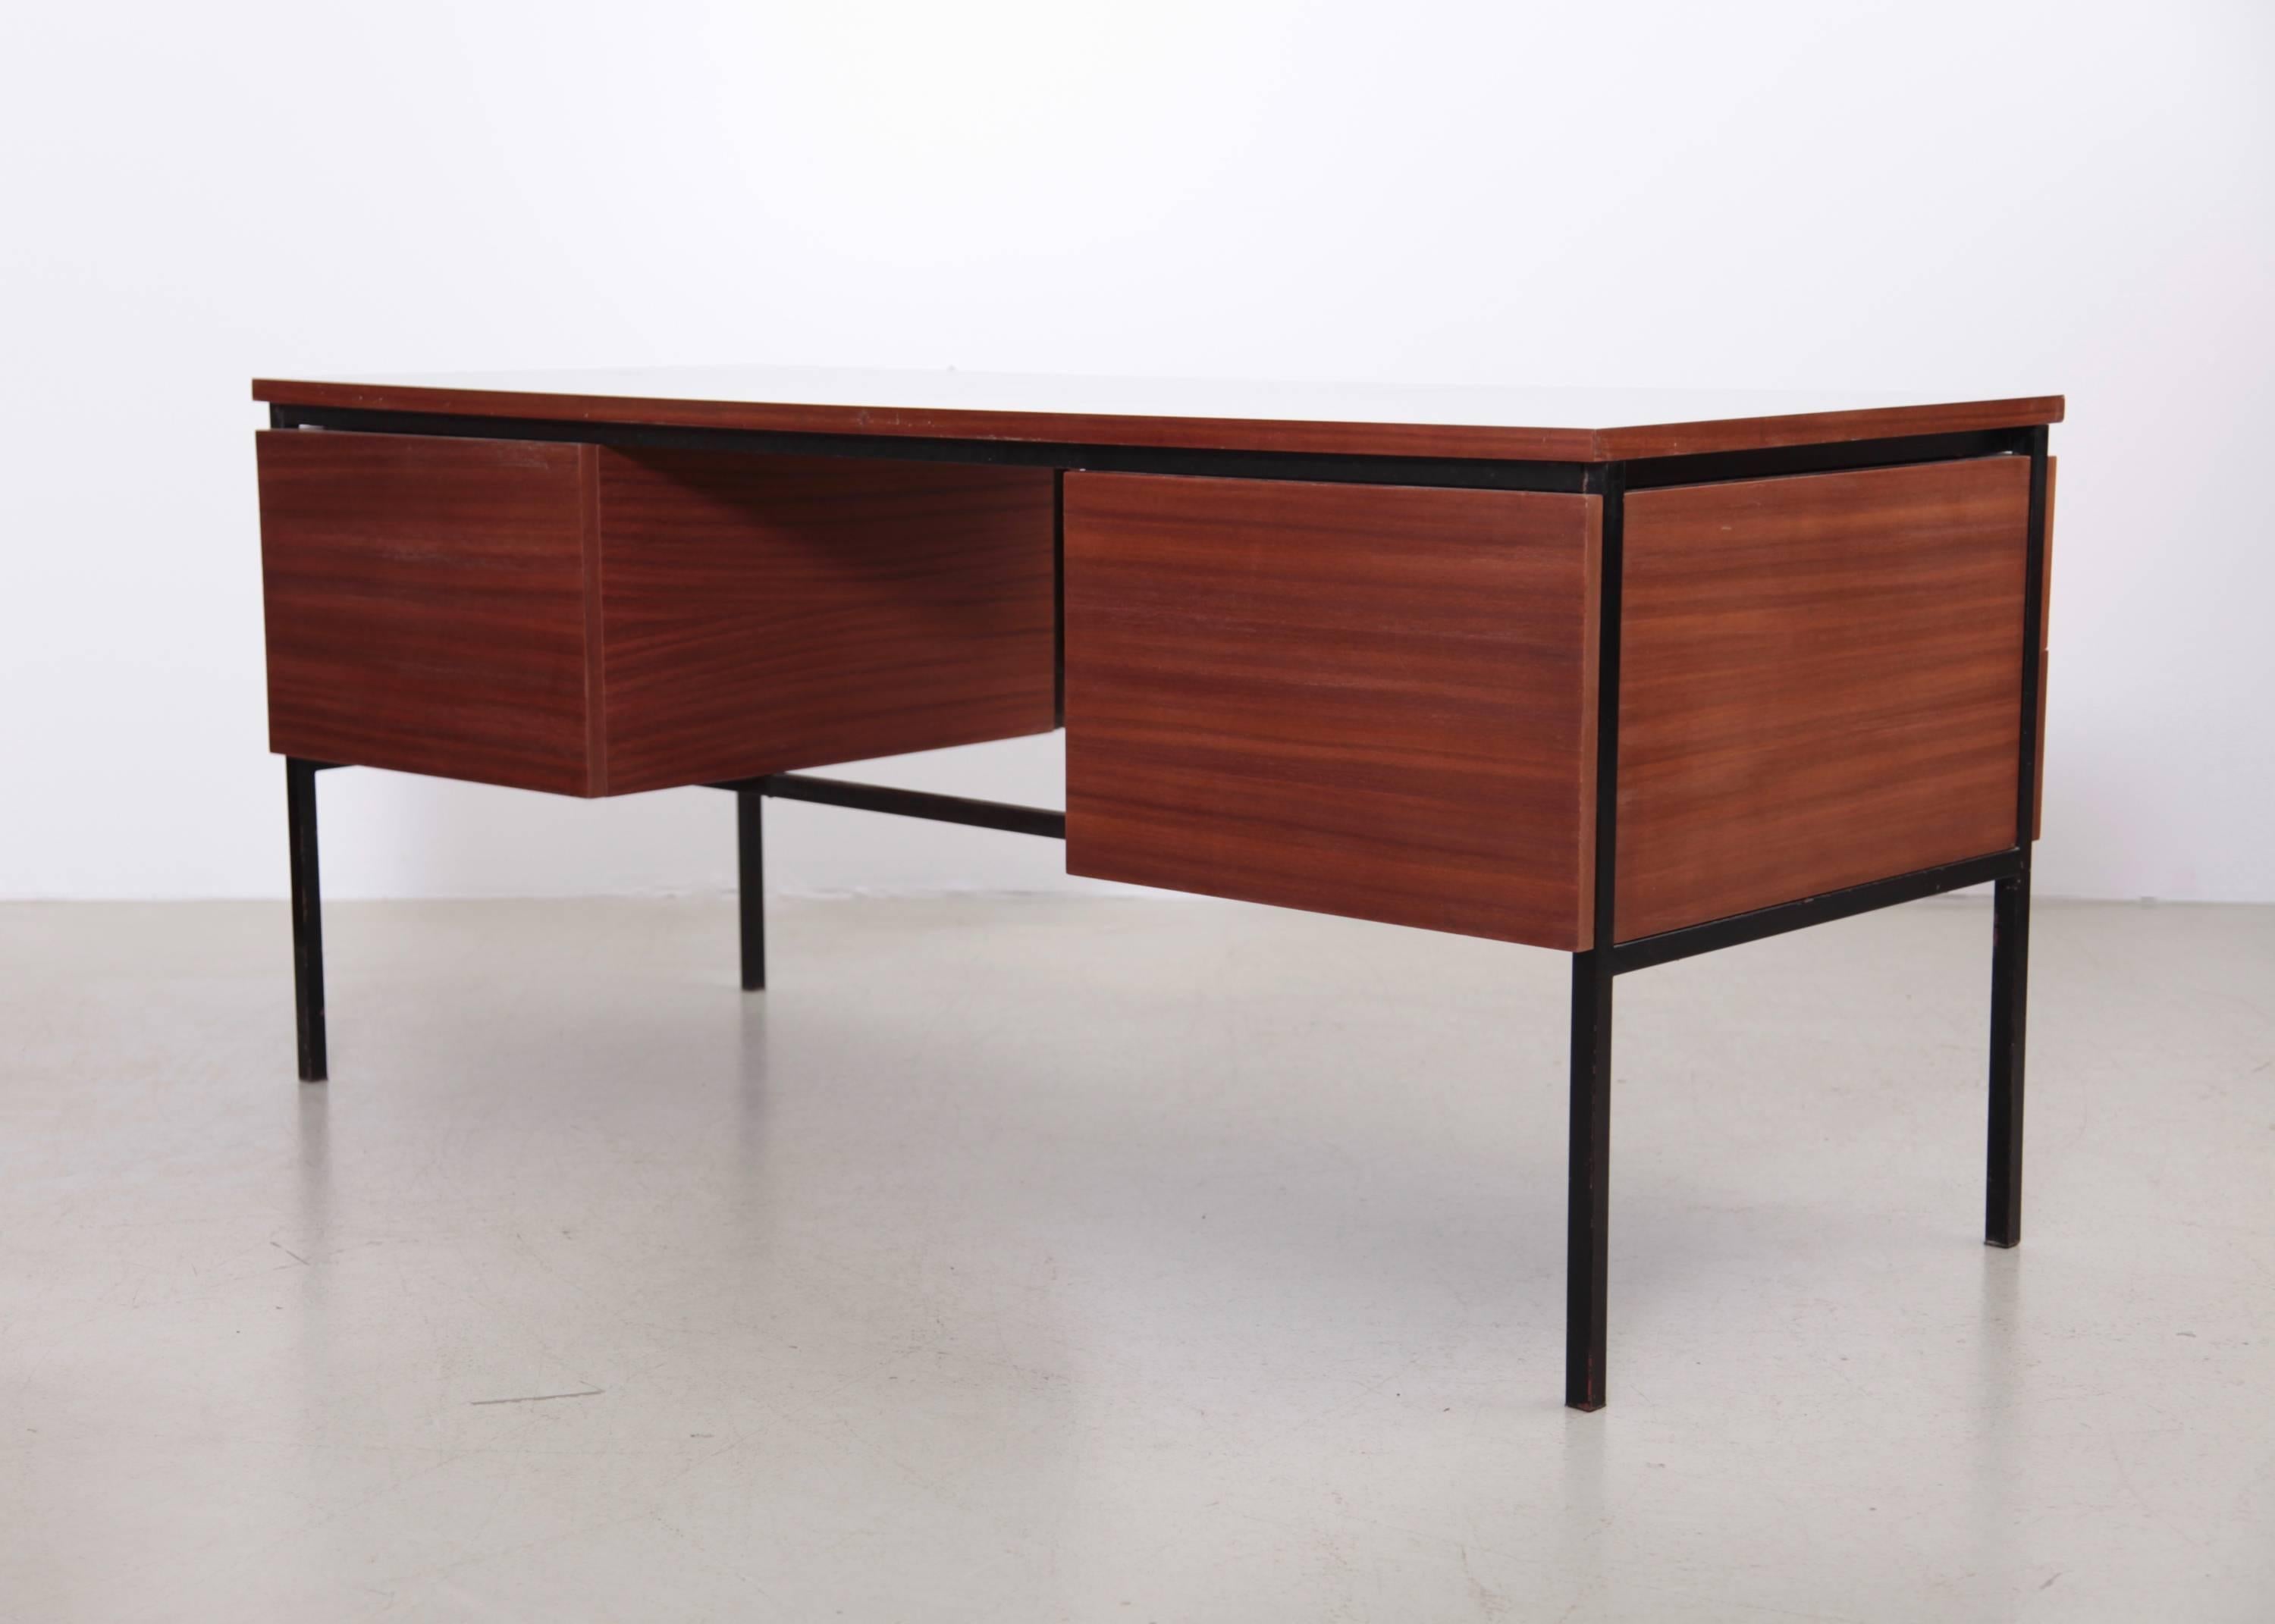 French Mahogany Desk with grey formica by Pierre Guariche for Minivelle, France, 1960s